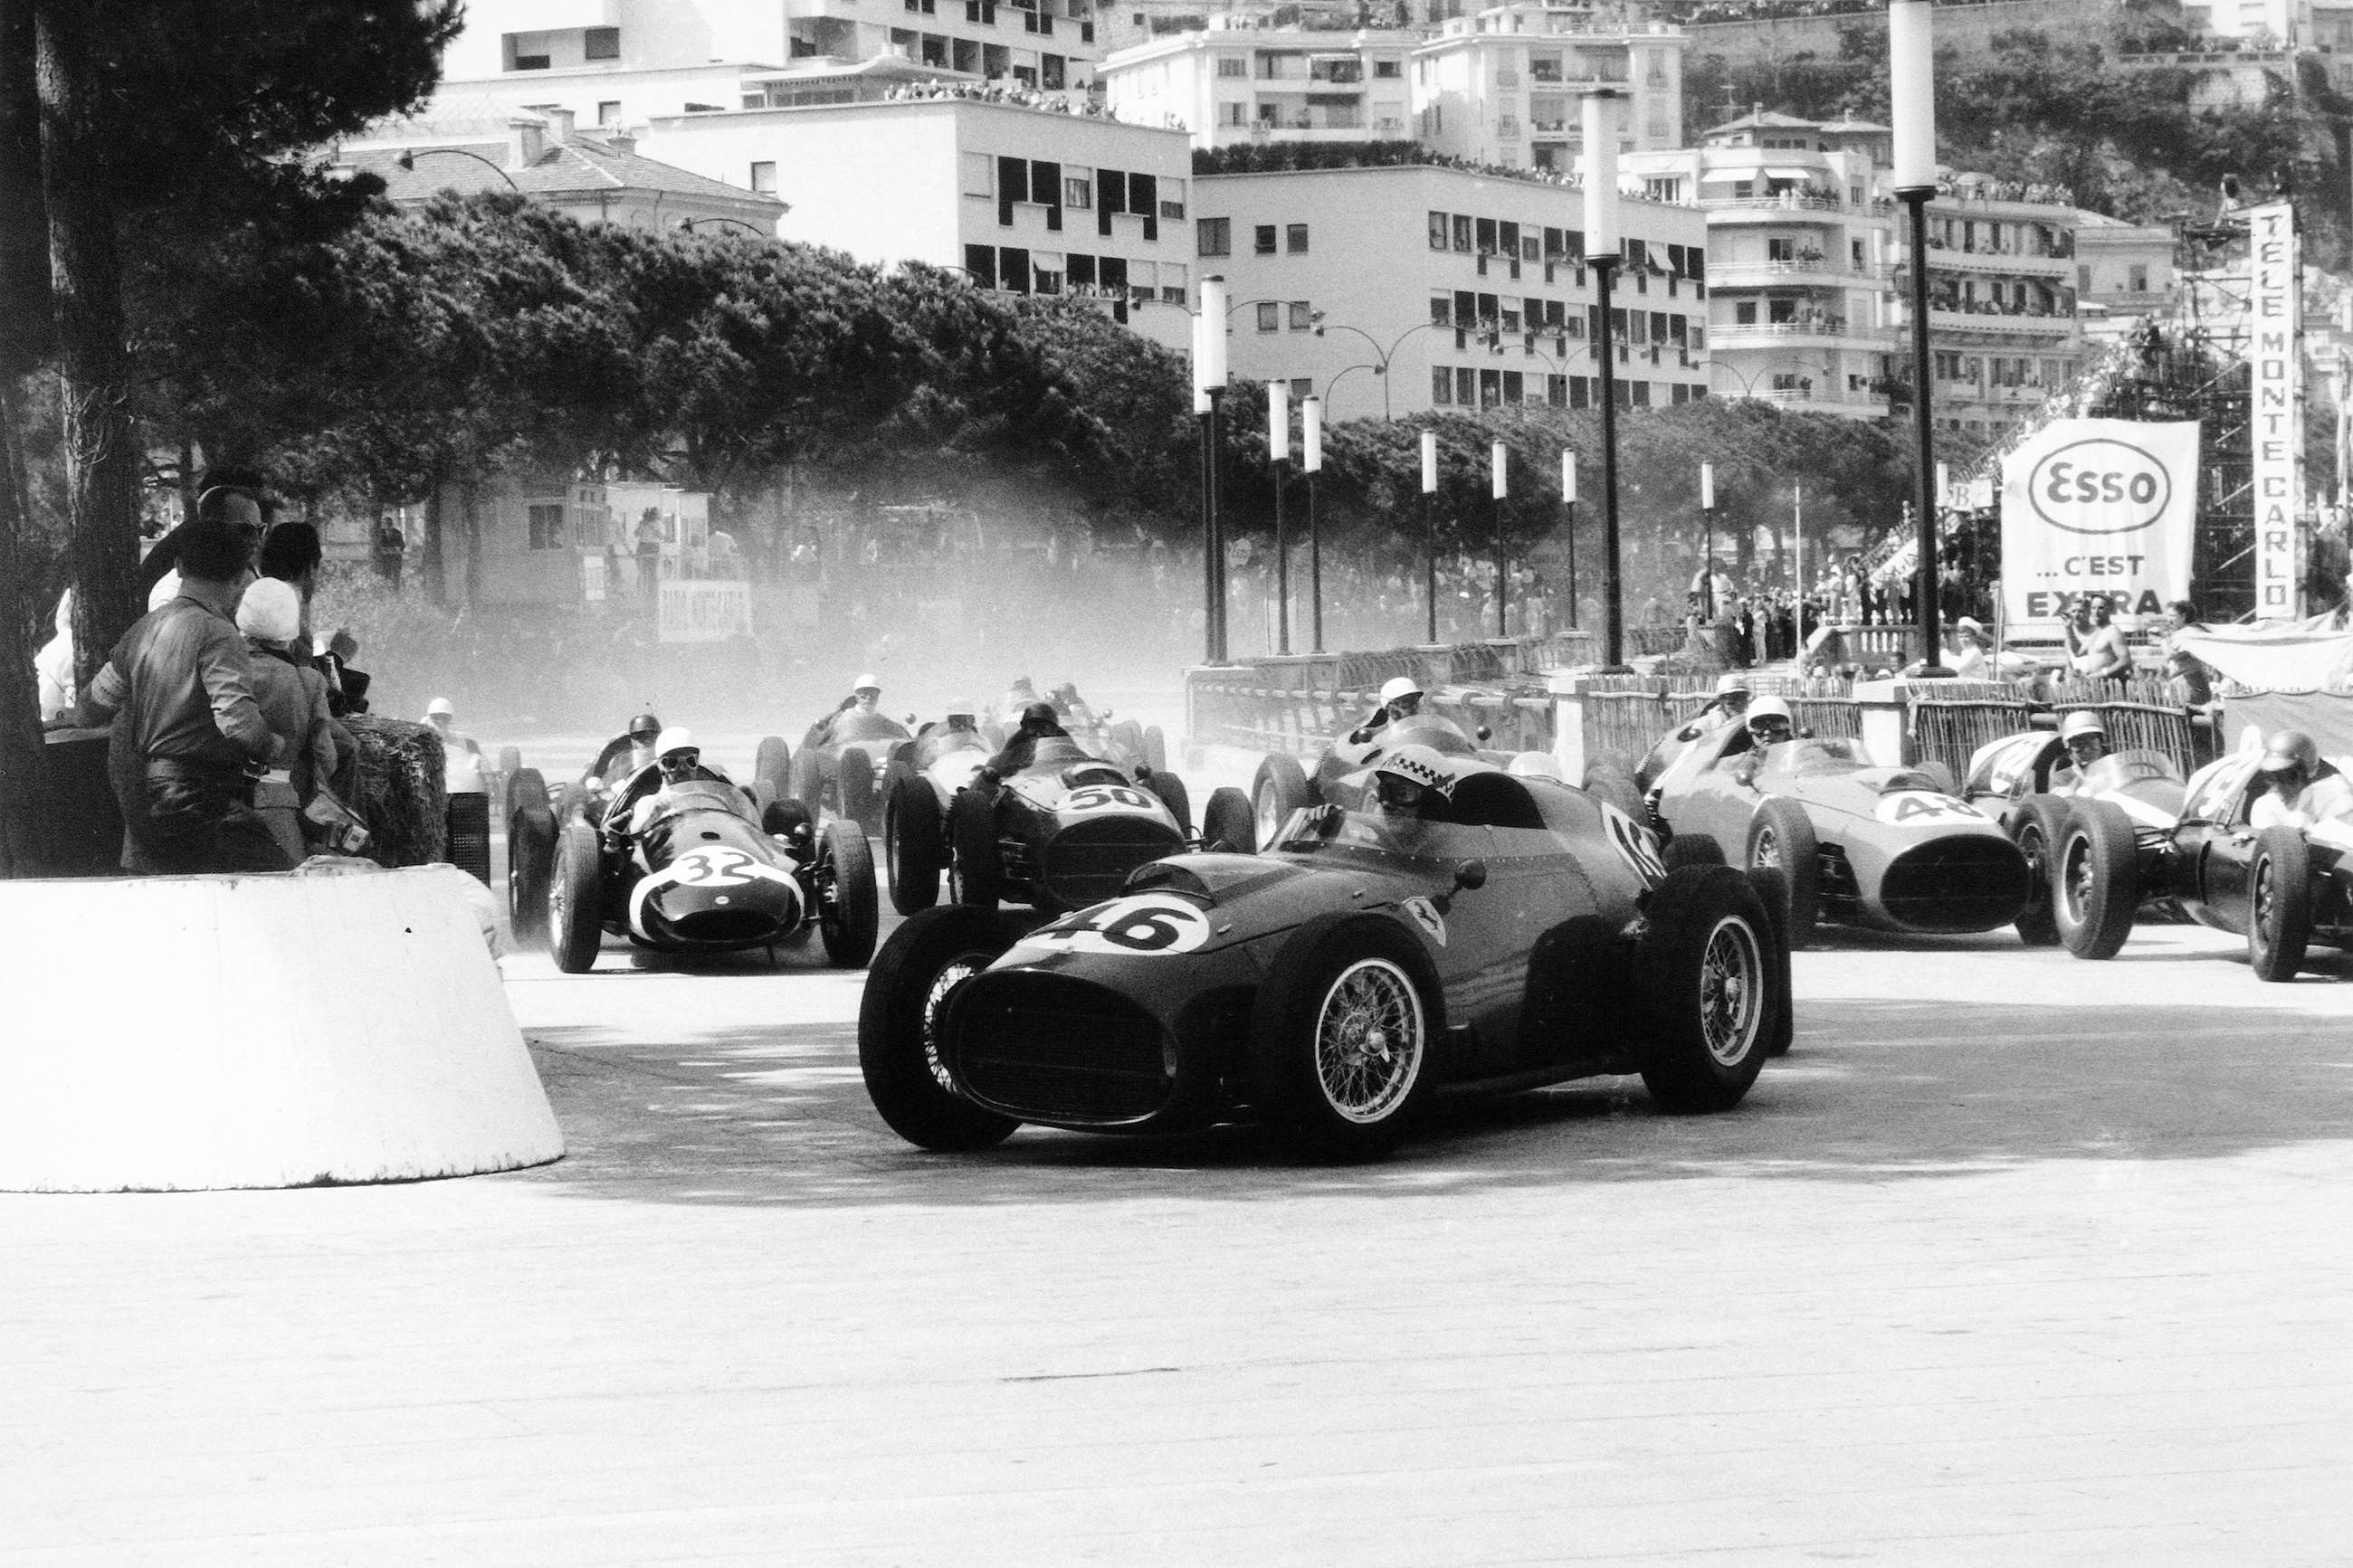 Monaco, 1959. Jean Behra in his Ferrari Dino 246 leads Stirling Moss and Jack Brabham in their Cooper T51 Climax.